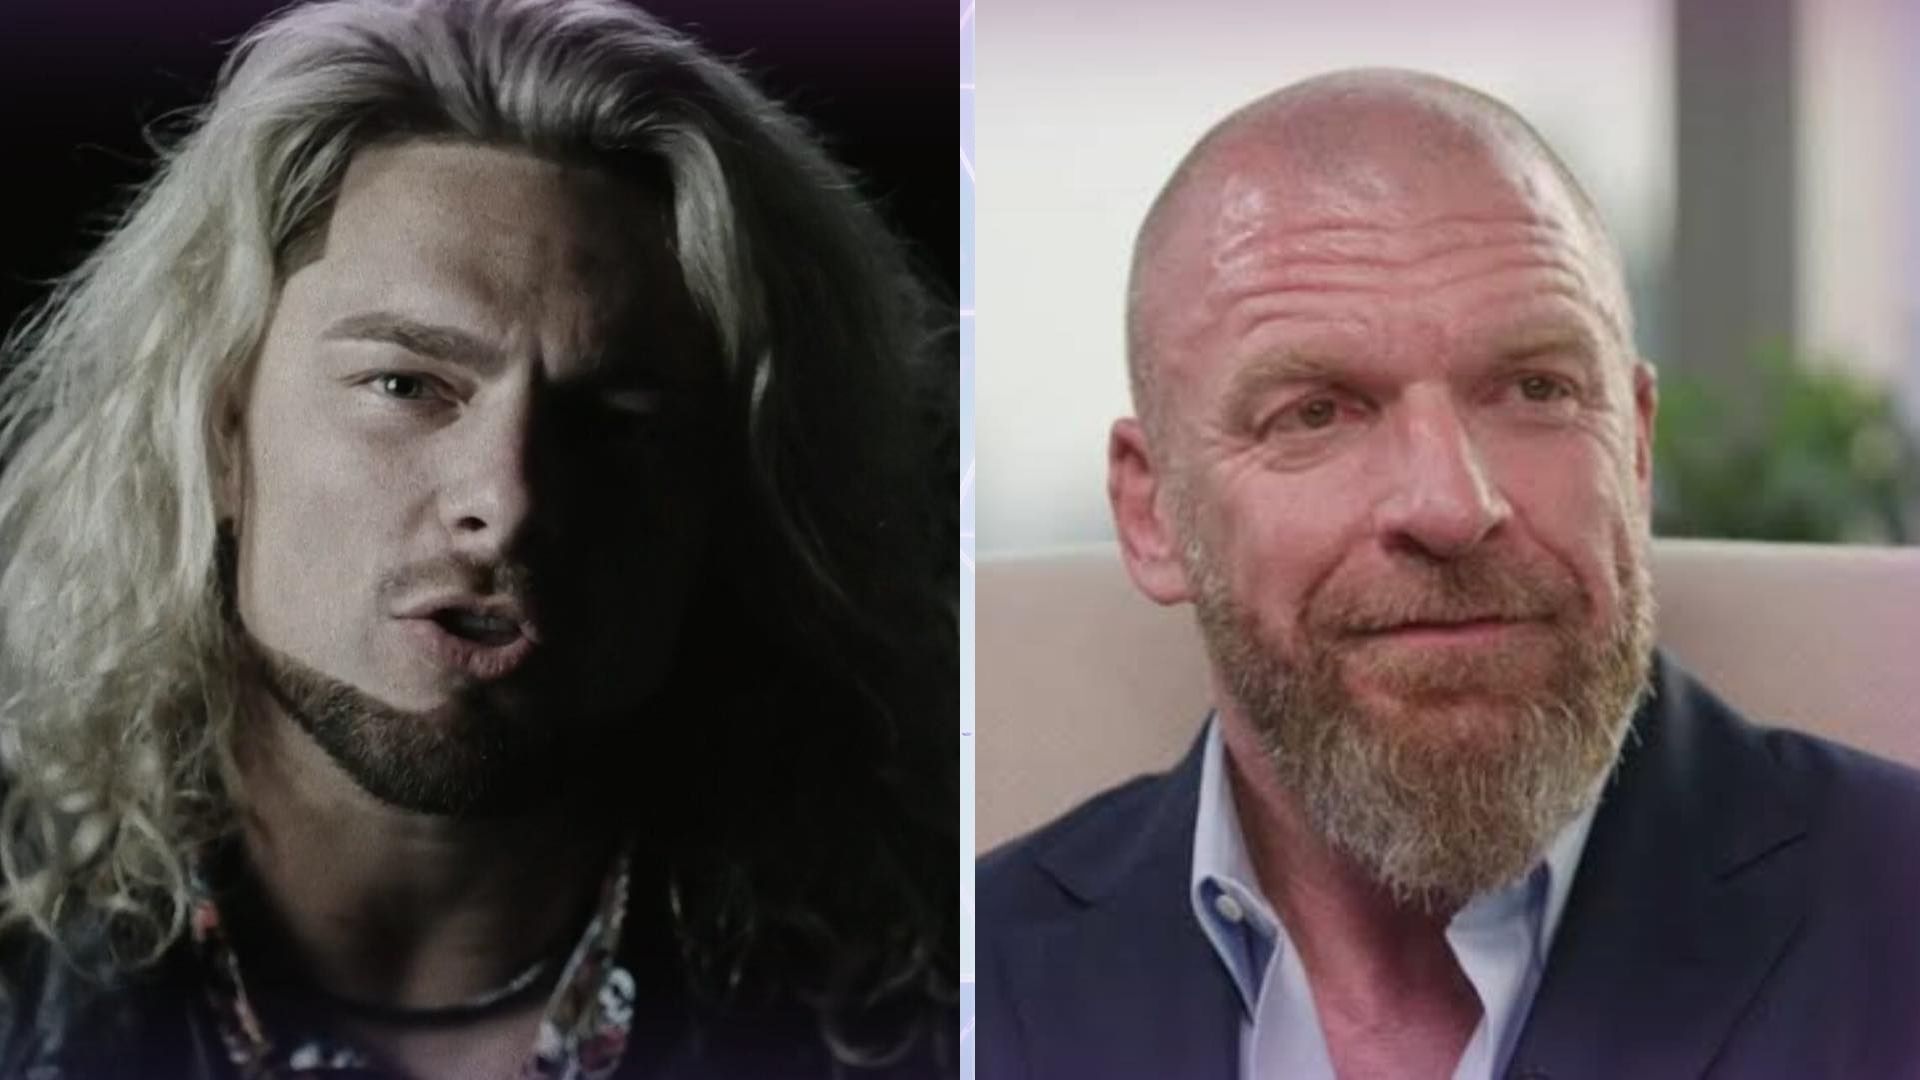 Triple H may bring in another former AEW star to WWE